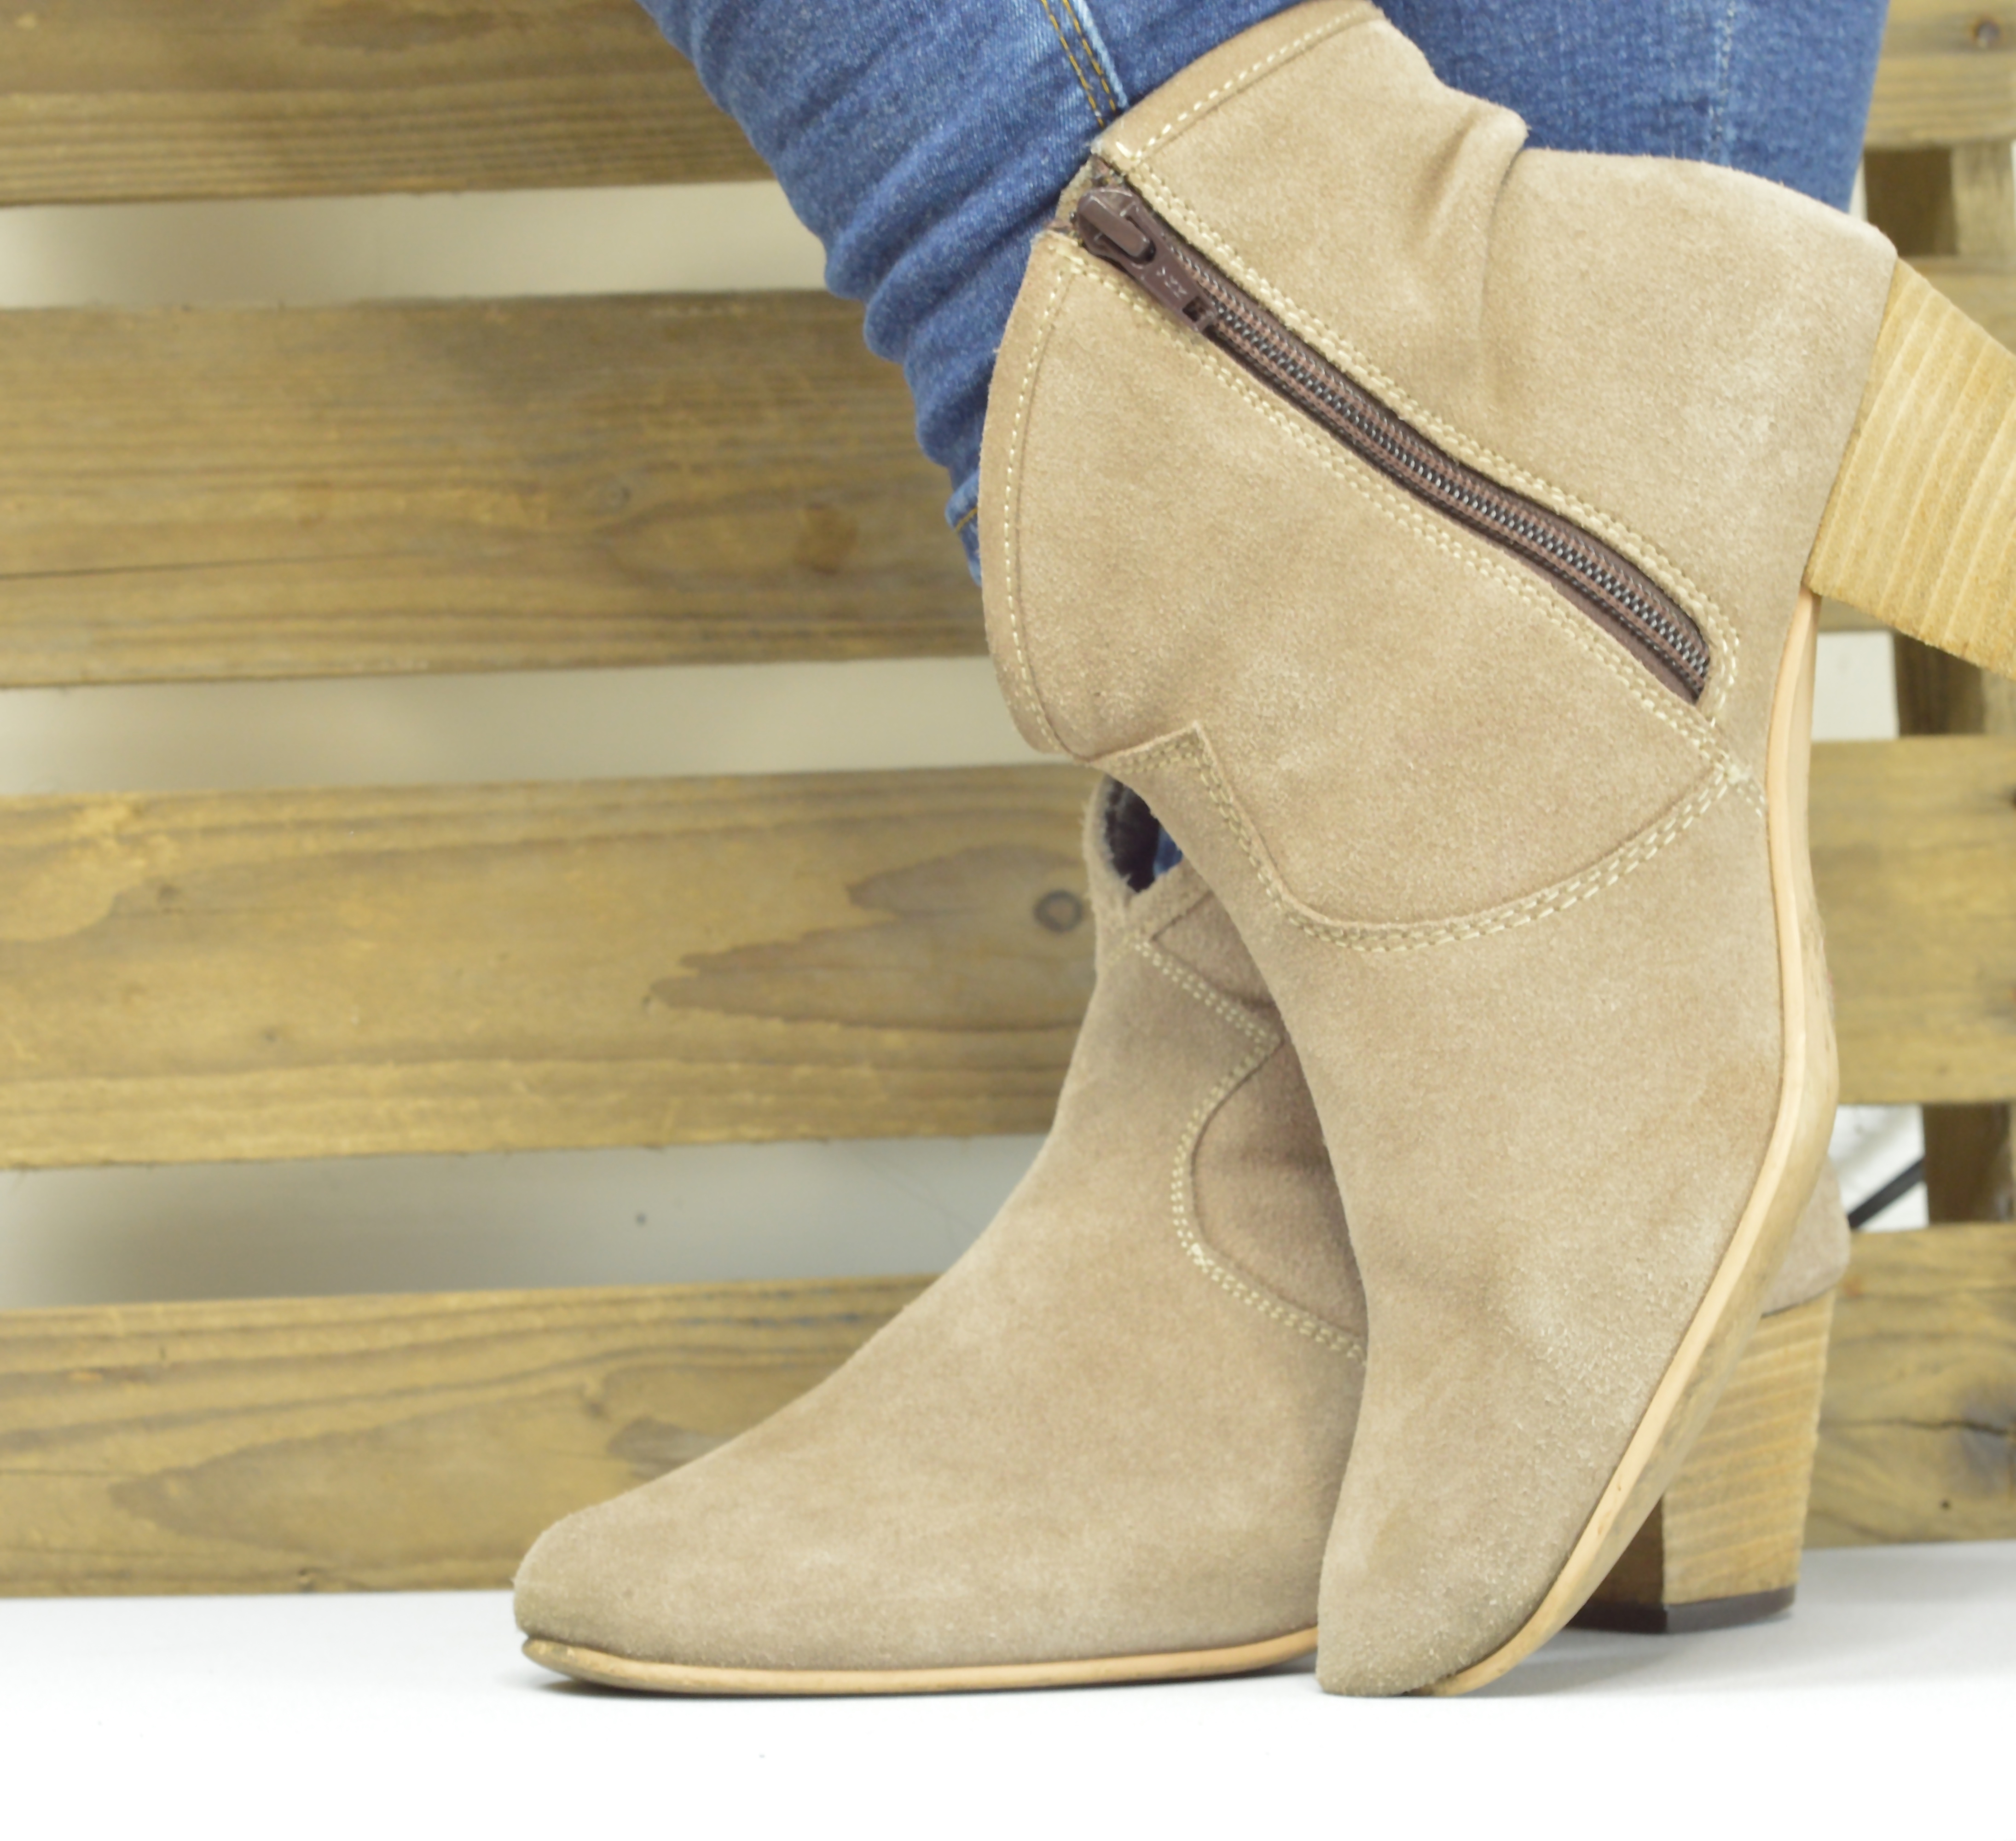 Ravel Alicia Mid Heel Ankle Boots in Beige Suede